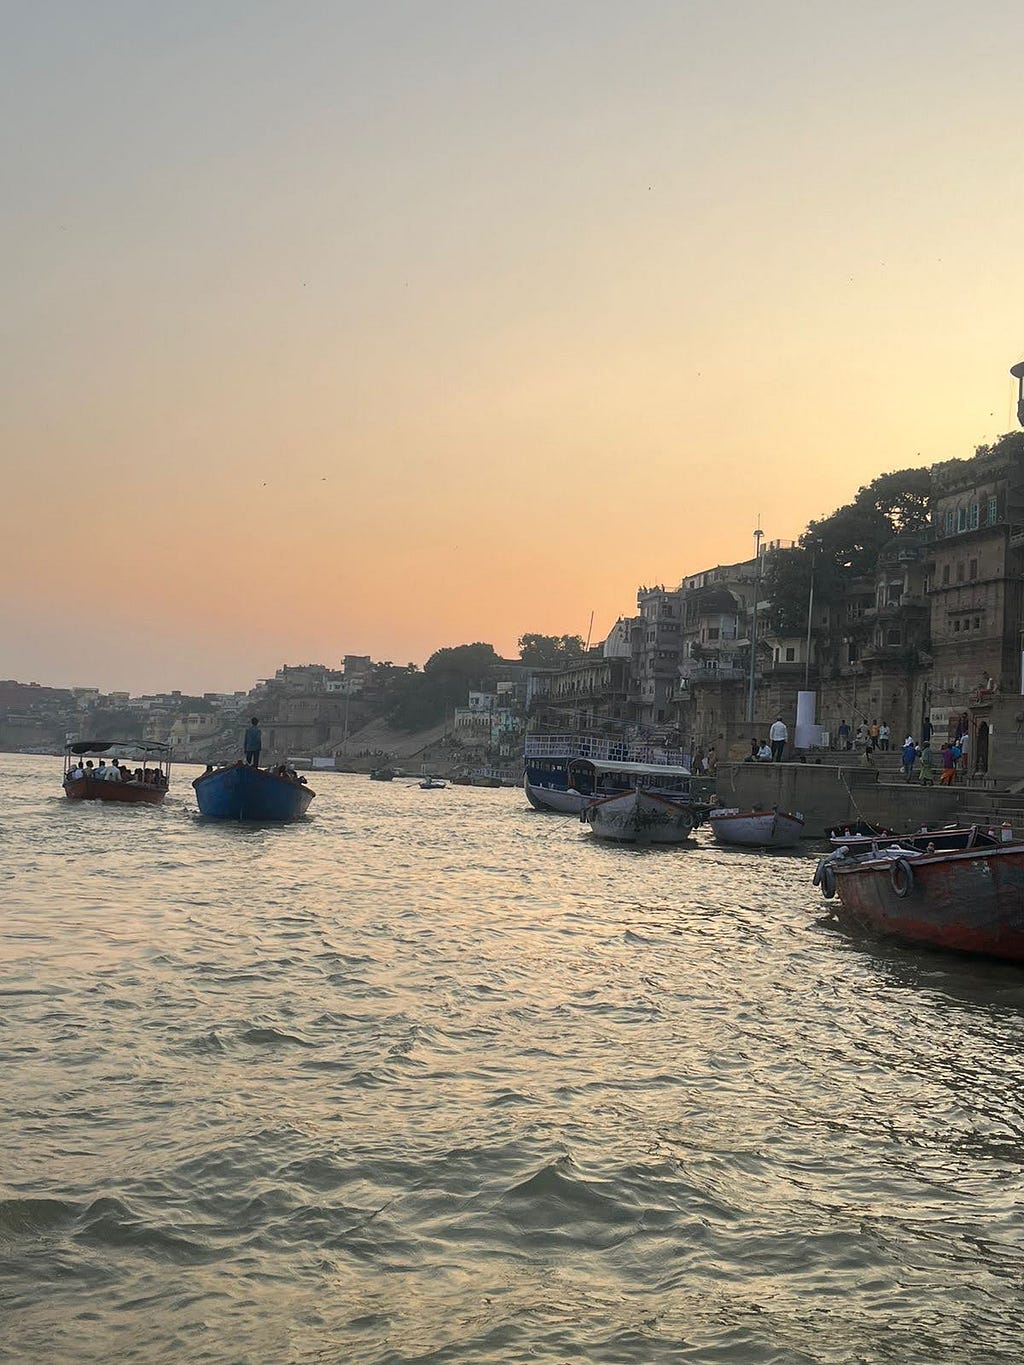 varanasi boat ride takes you across all the ghats with scenic views